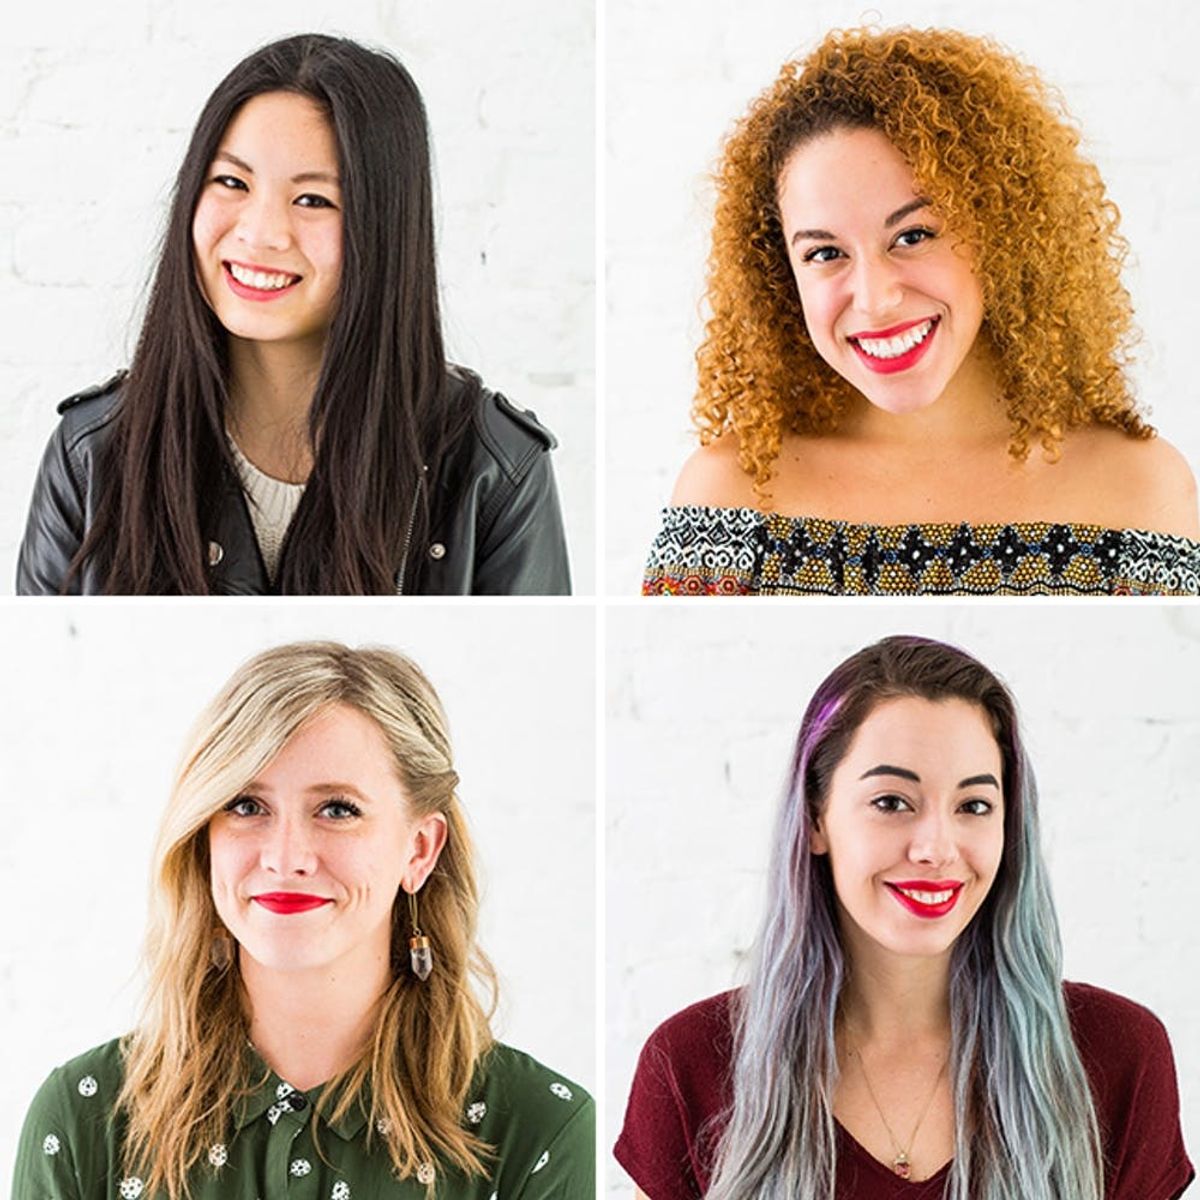 This Is What Happened When 55 Women Tested 55 Different Red Lipsticks